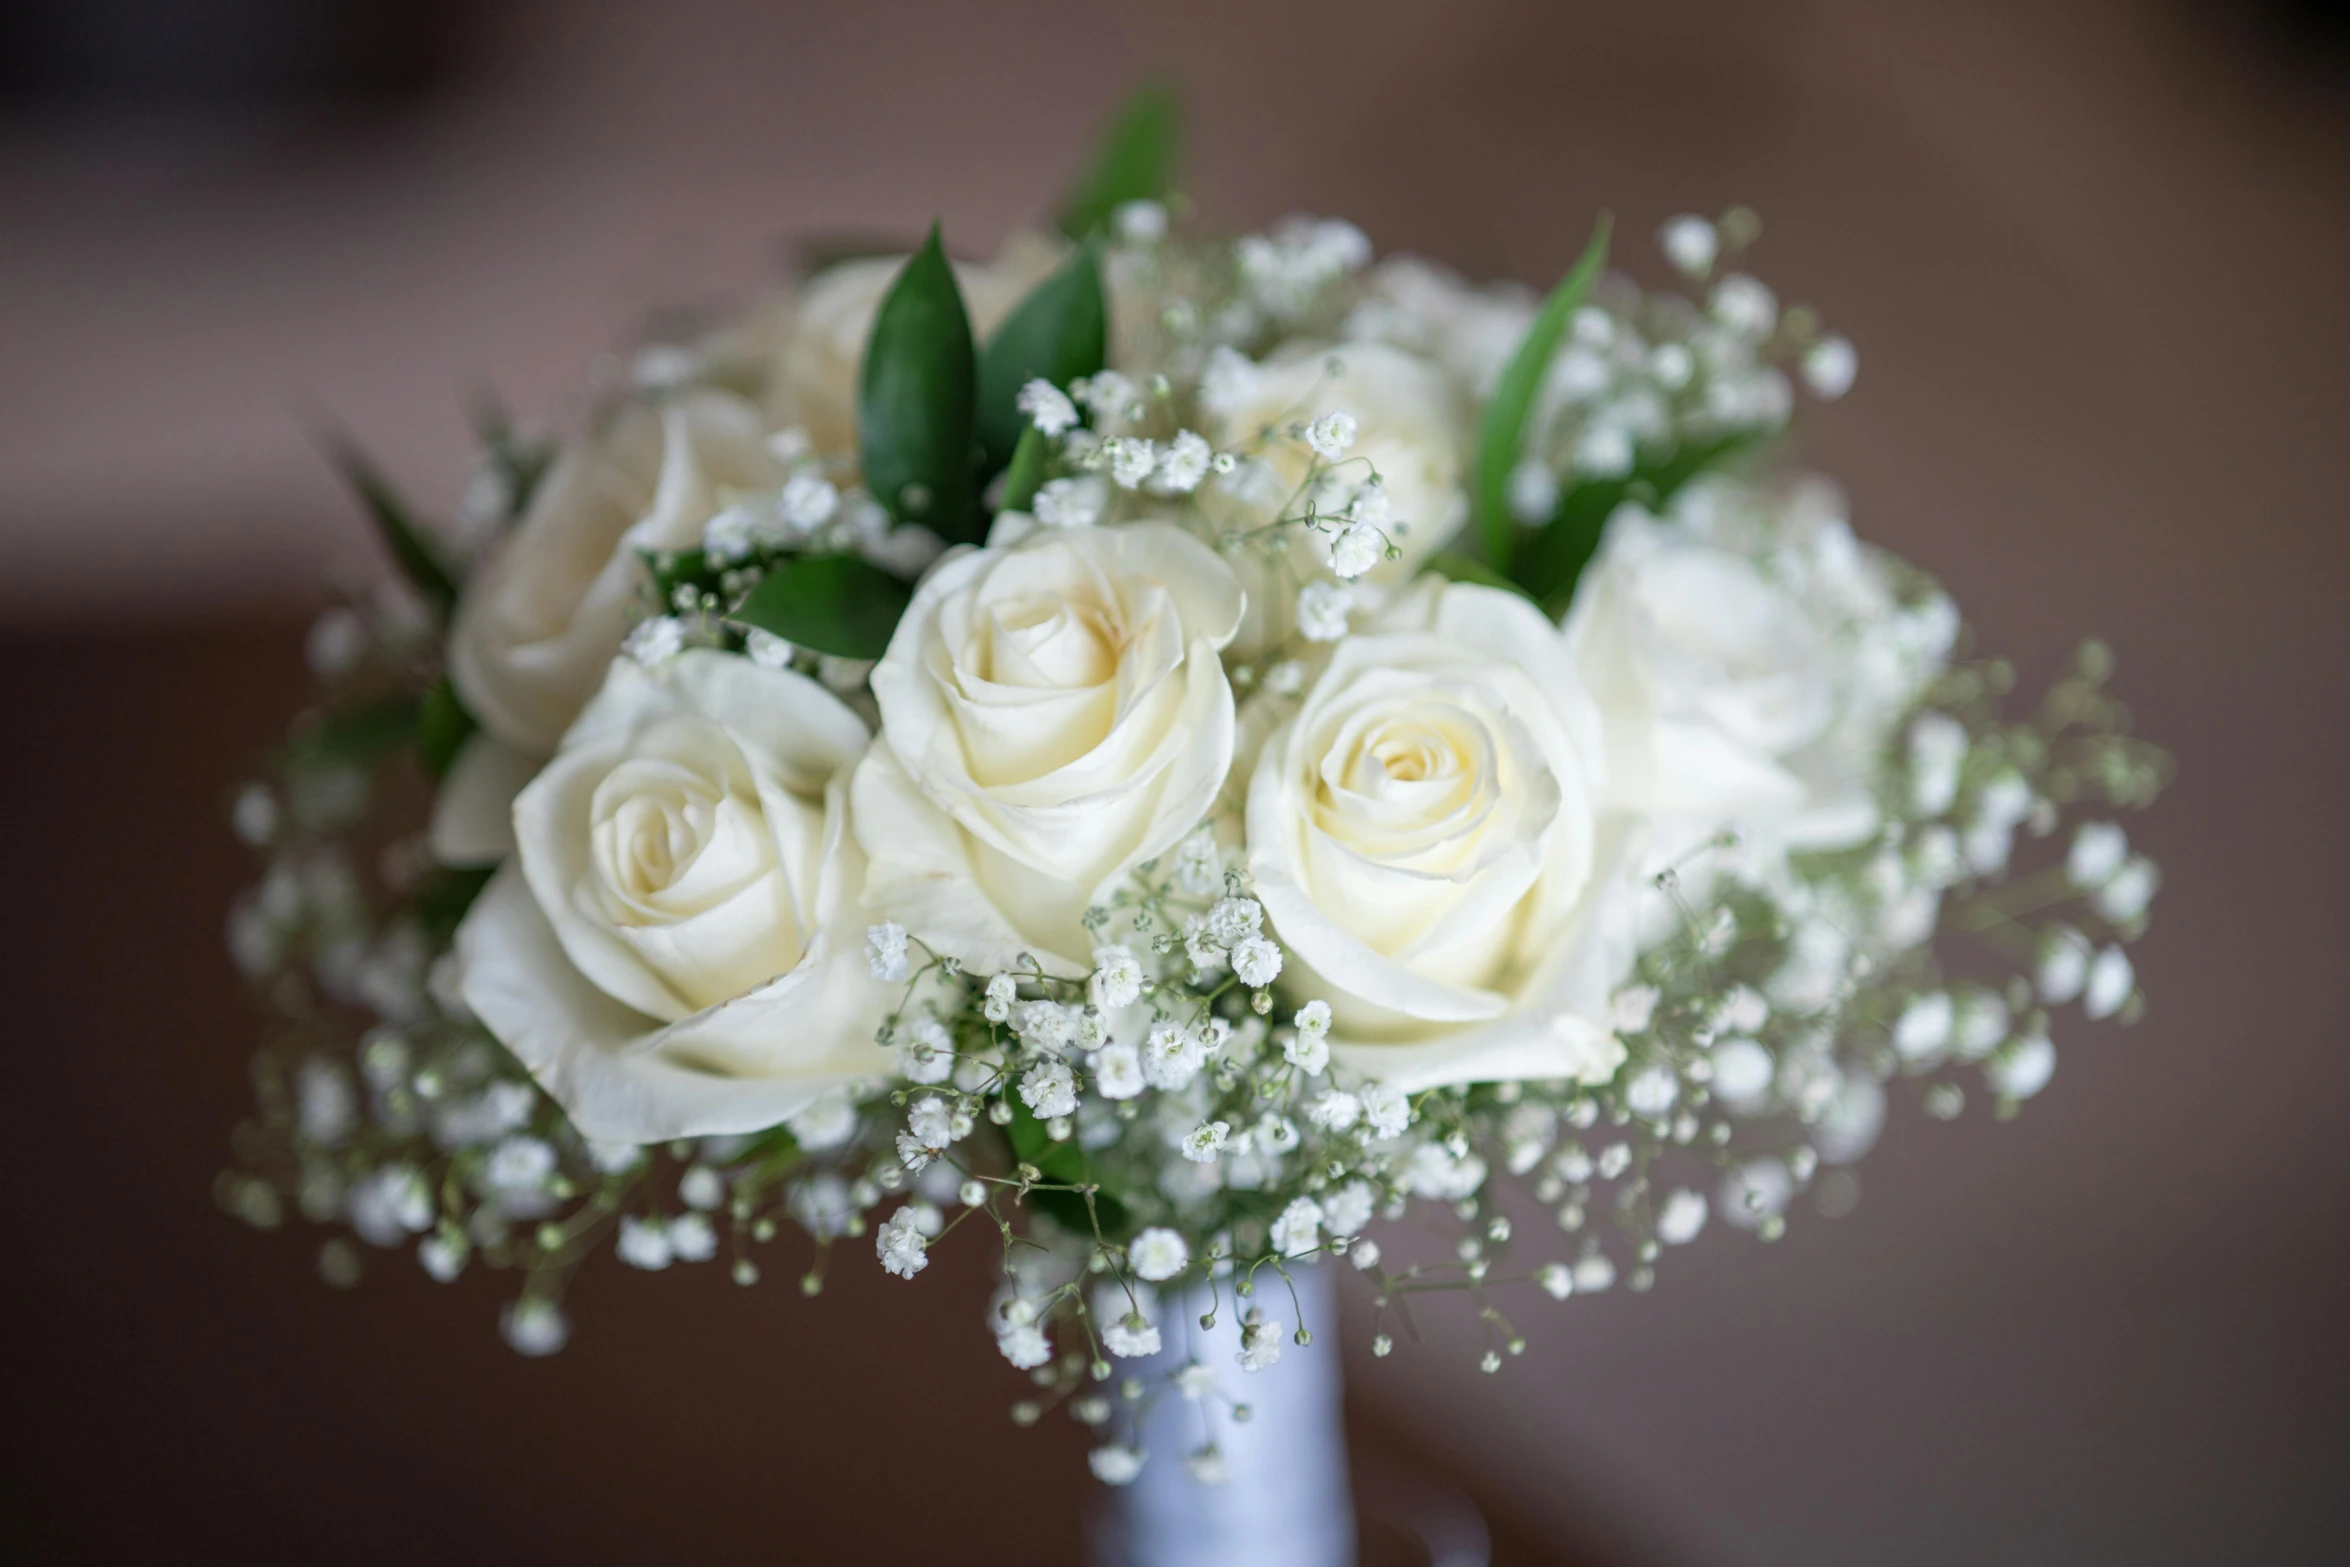 a vase filled with white roses and baby's breath